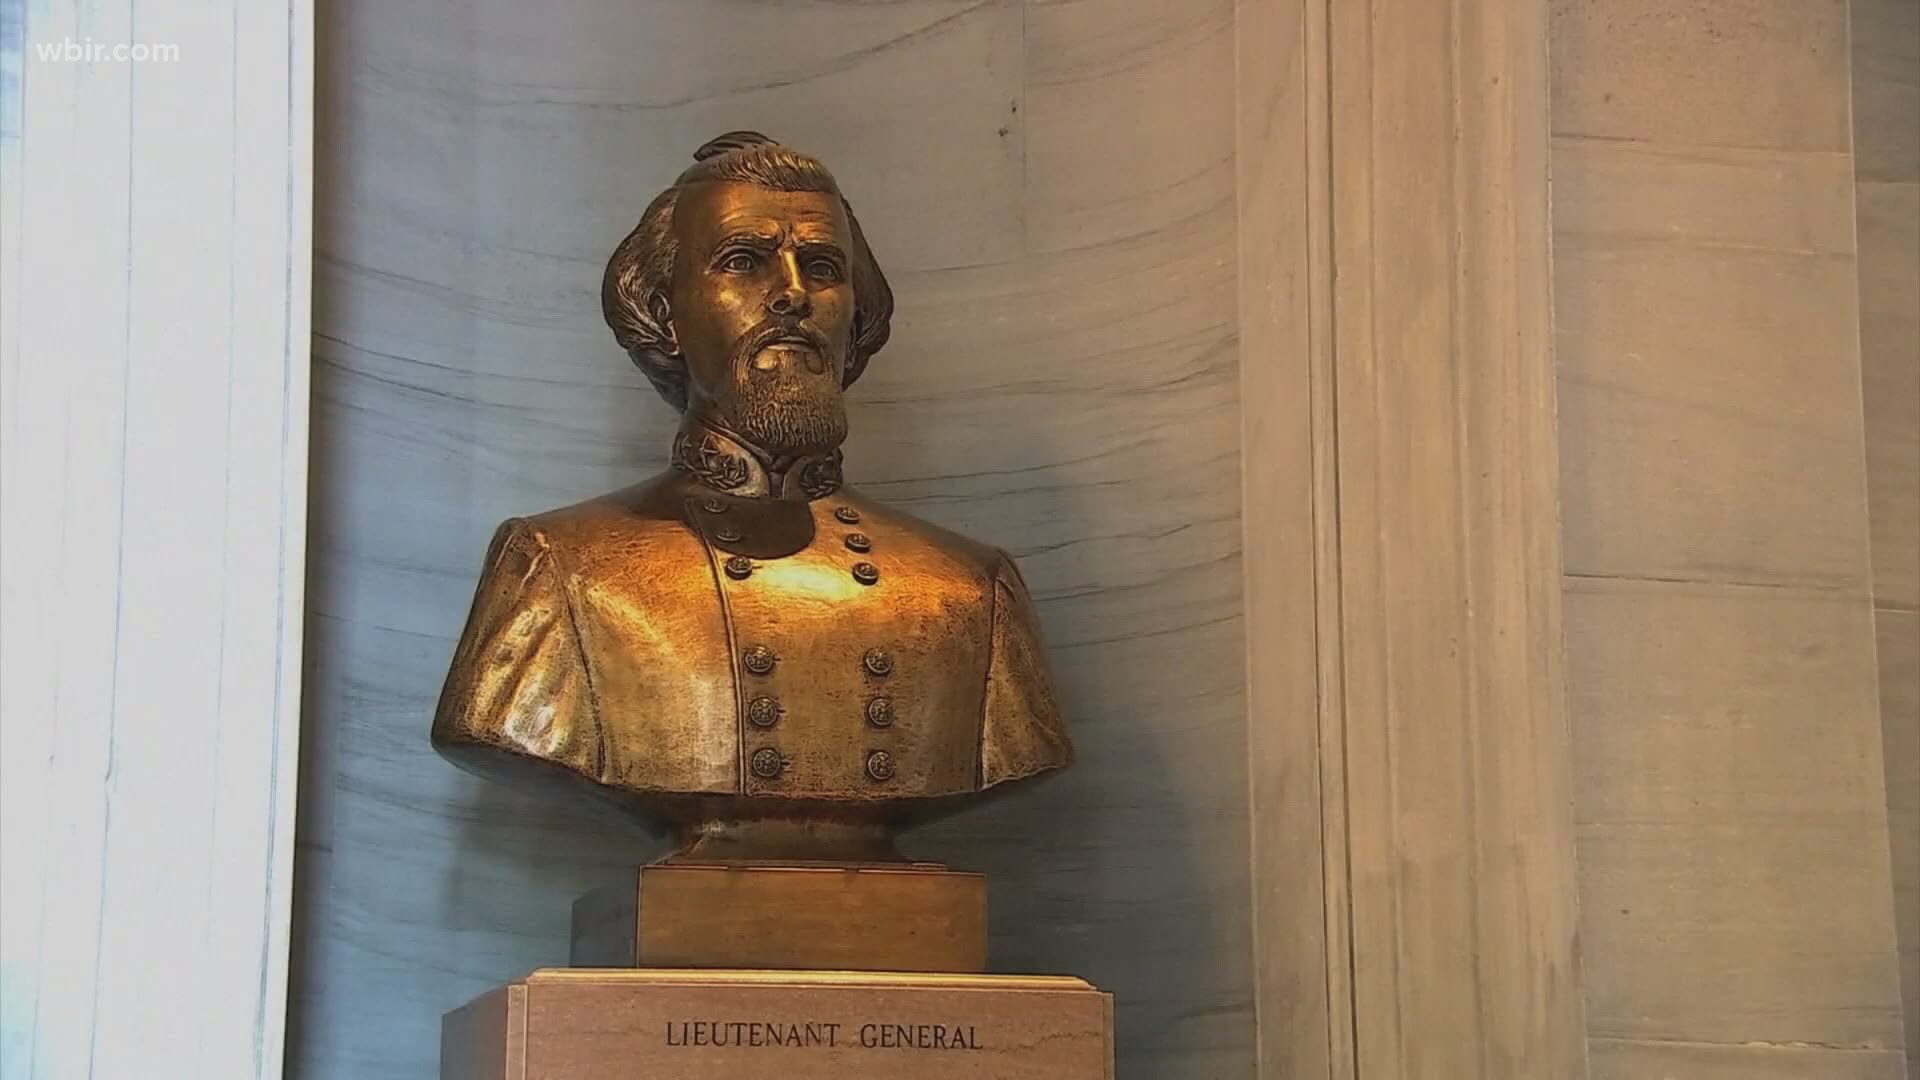 Governor Bill Lee said he recommended the State Capitol Committee move the Nathan Bedford Forrest bust from the capitol to a museum.